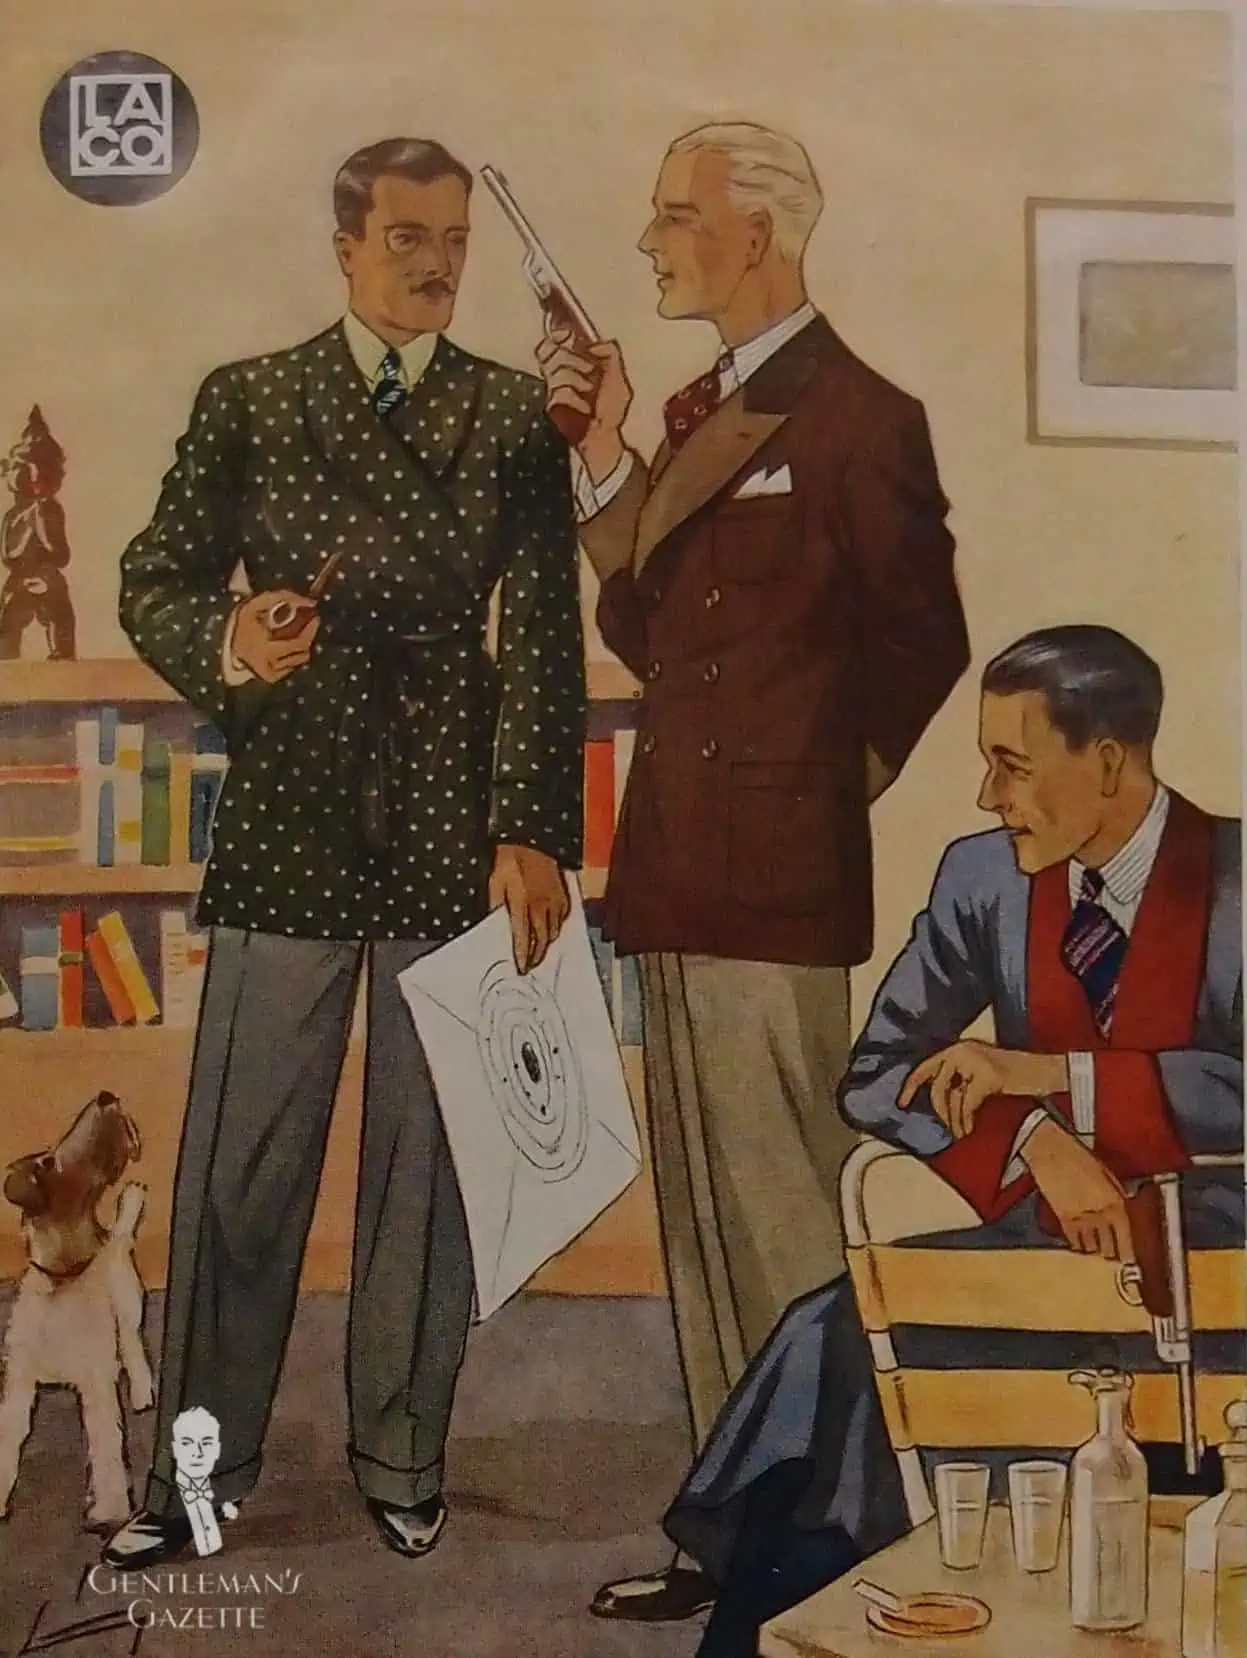 An illustrated ad depicting two men in smoking jackets and one in a house coat